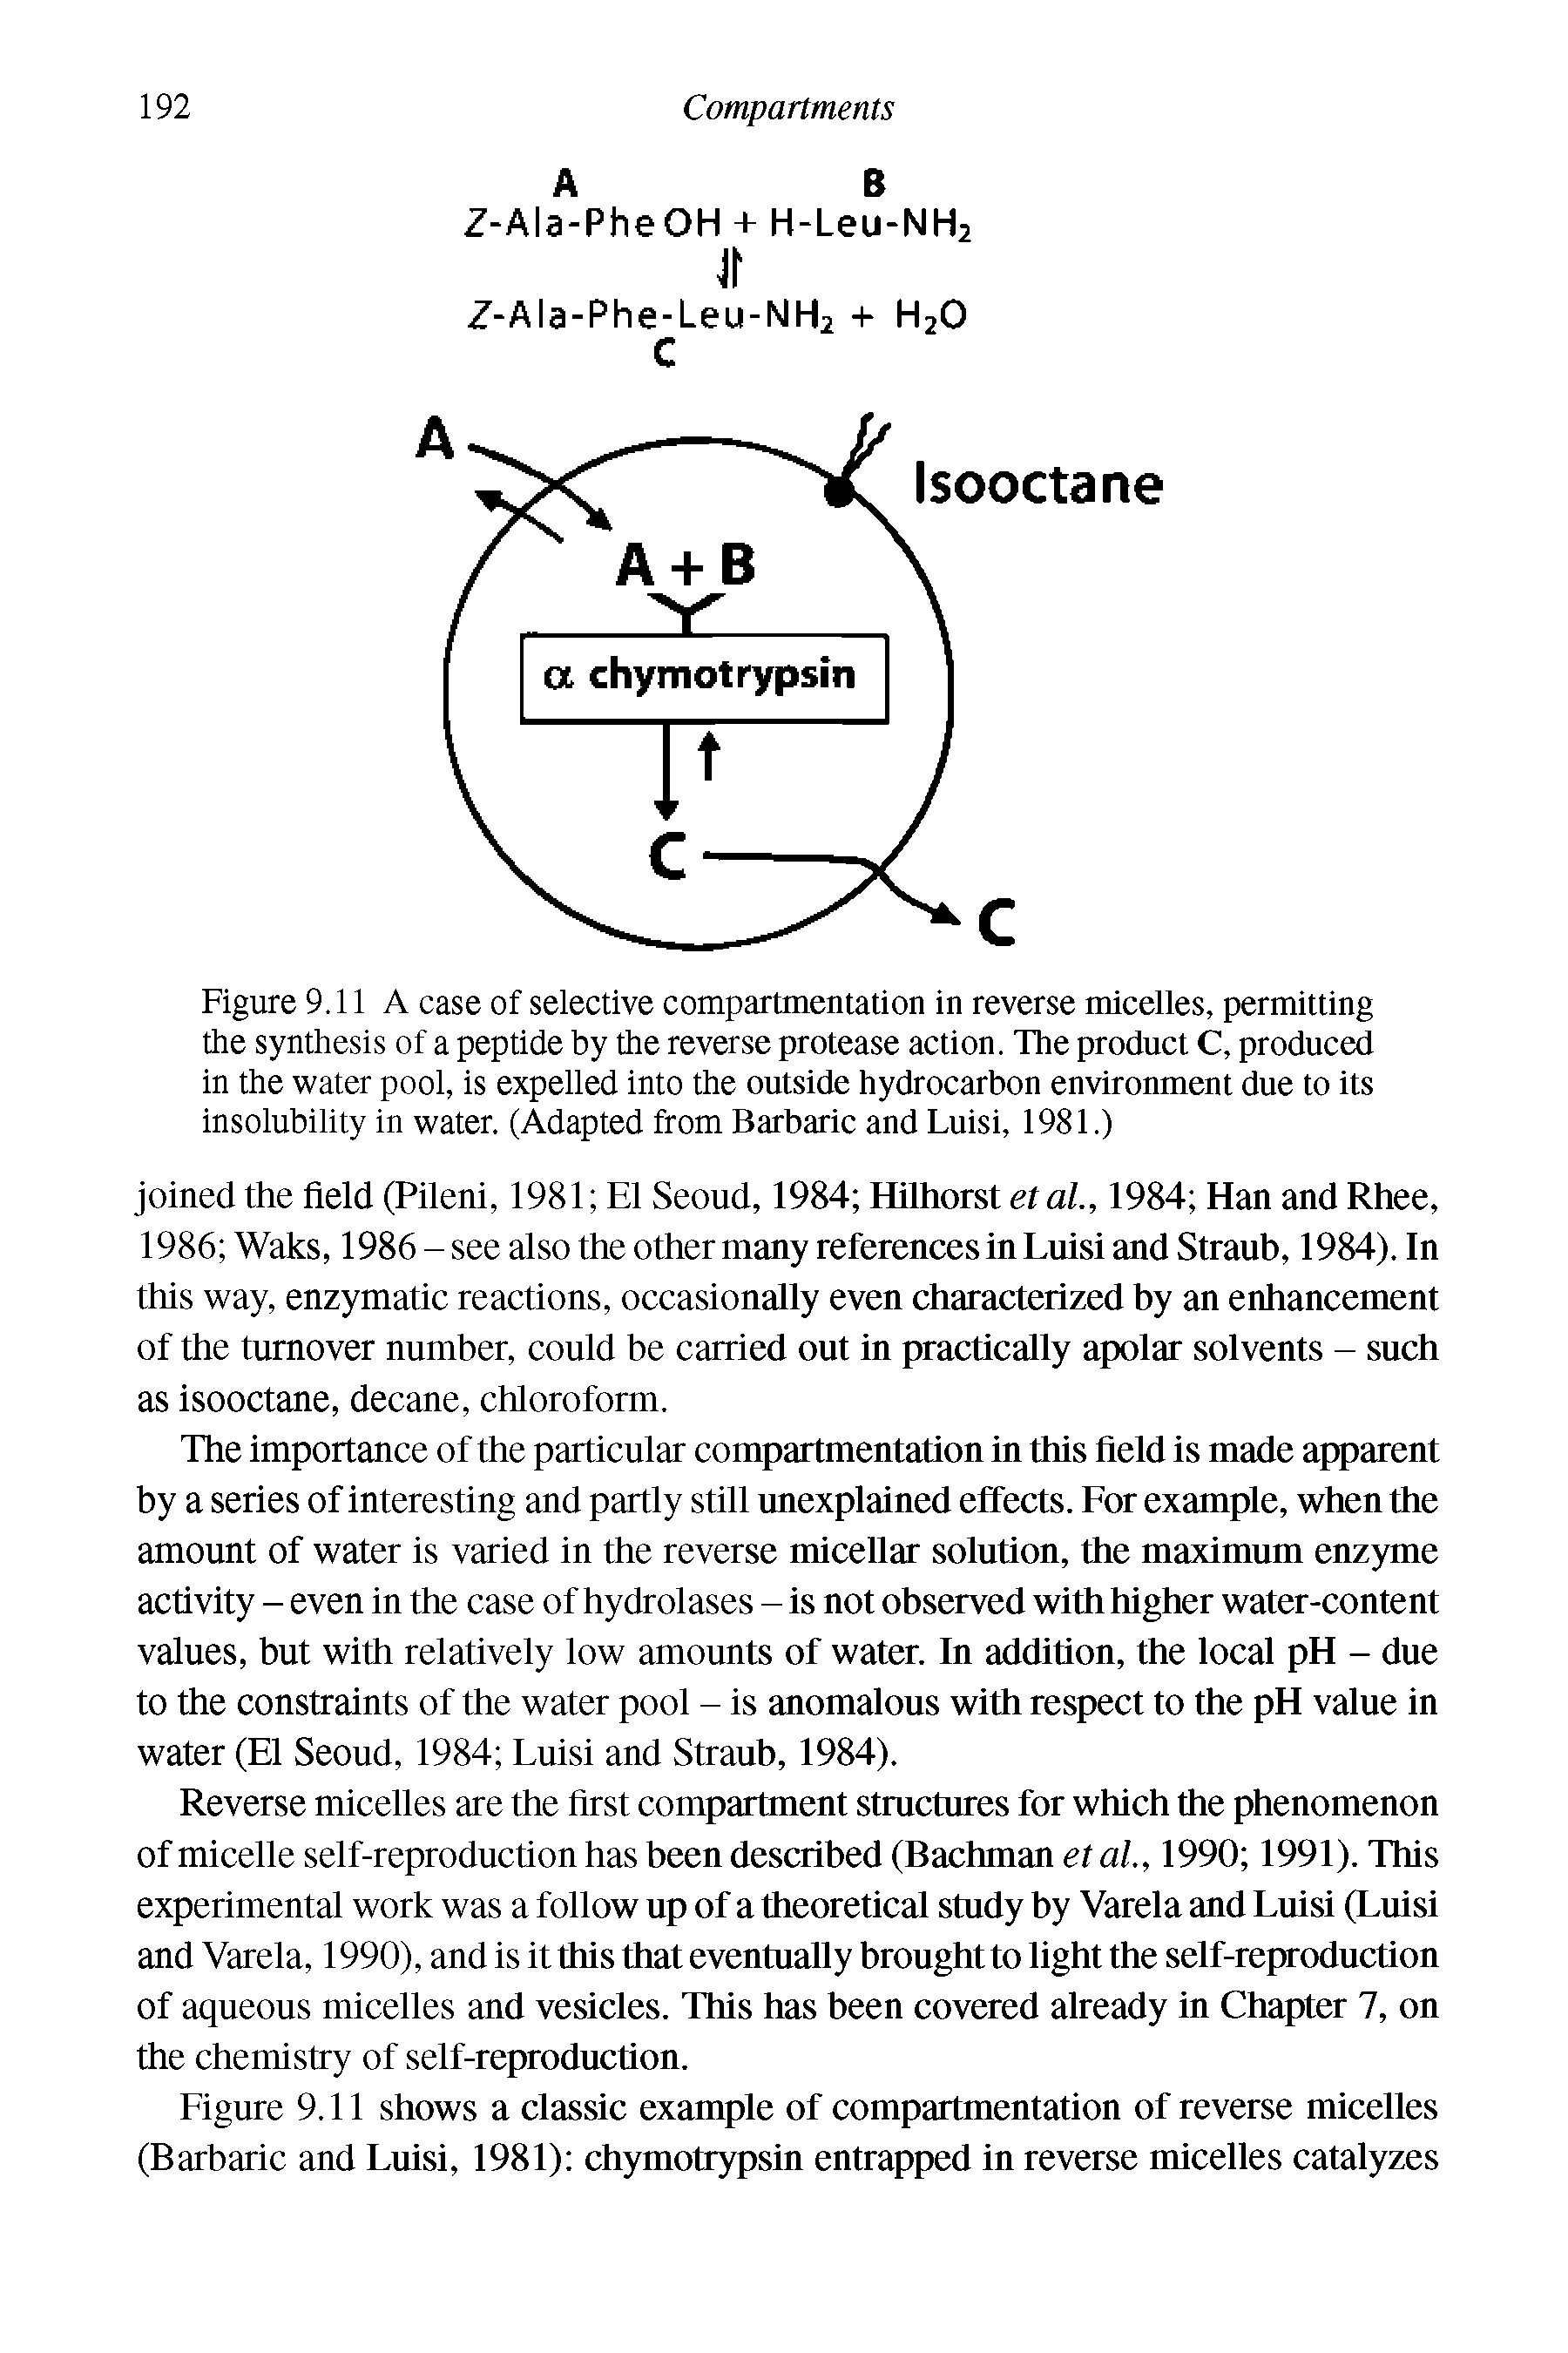 Figure 9.11 A case of selective compartmentation in reverse micelles, permitting the synthesis of a peptide by the reverse protease action. The product C, produced in the water pool, is expelled into the outside hydrocarbon environment due to its insolubility in water. (Adapted from Barbaric and Luisi, 1981.)...